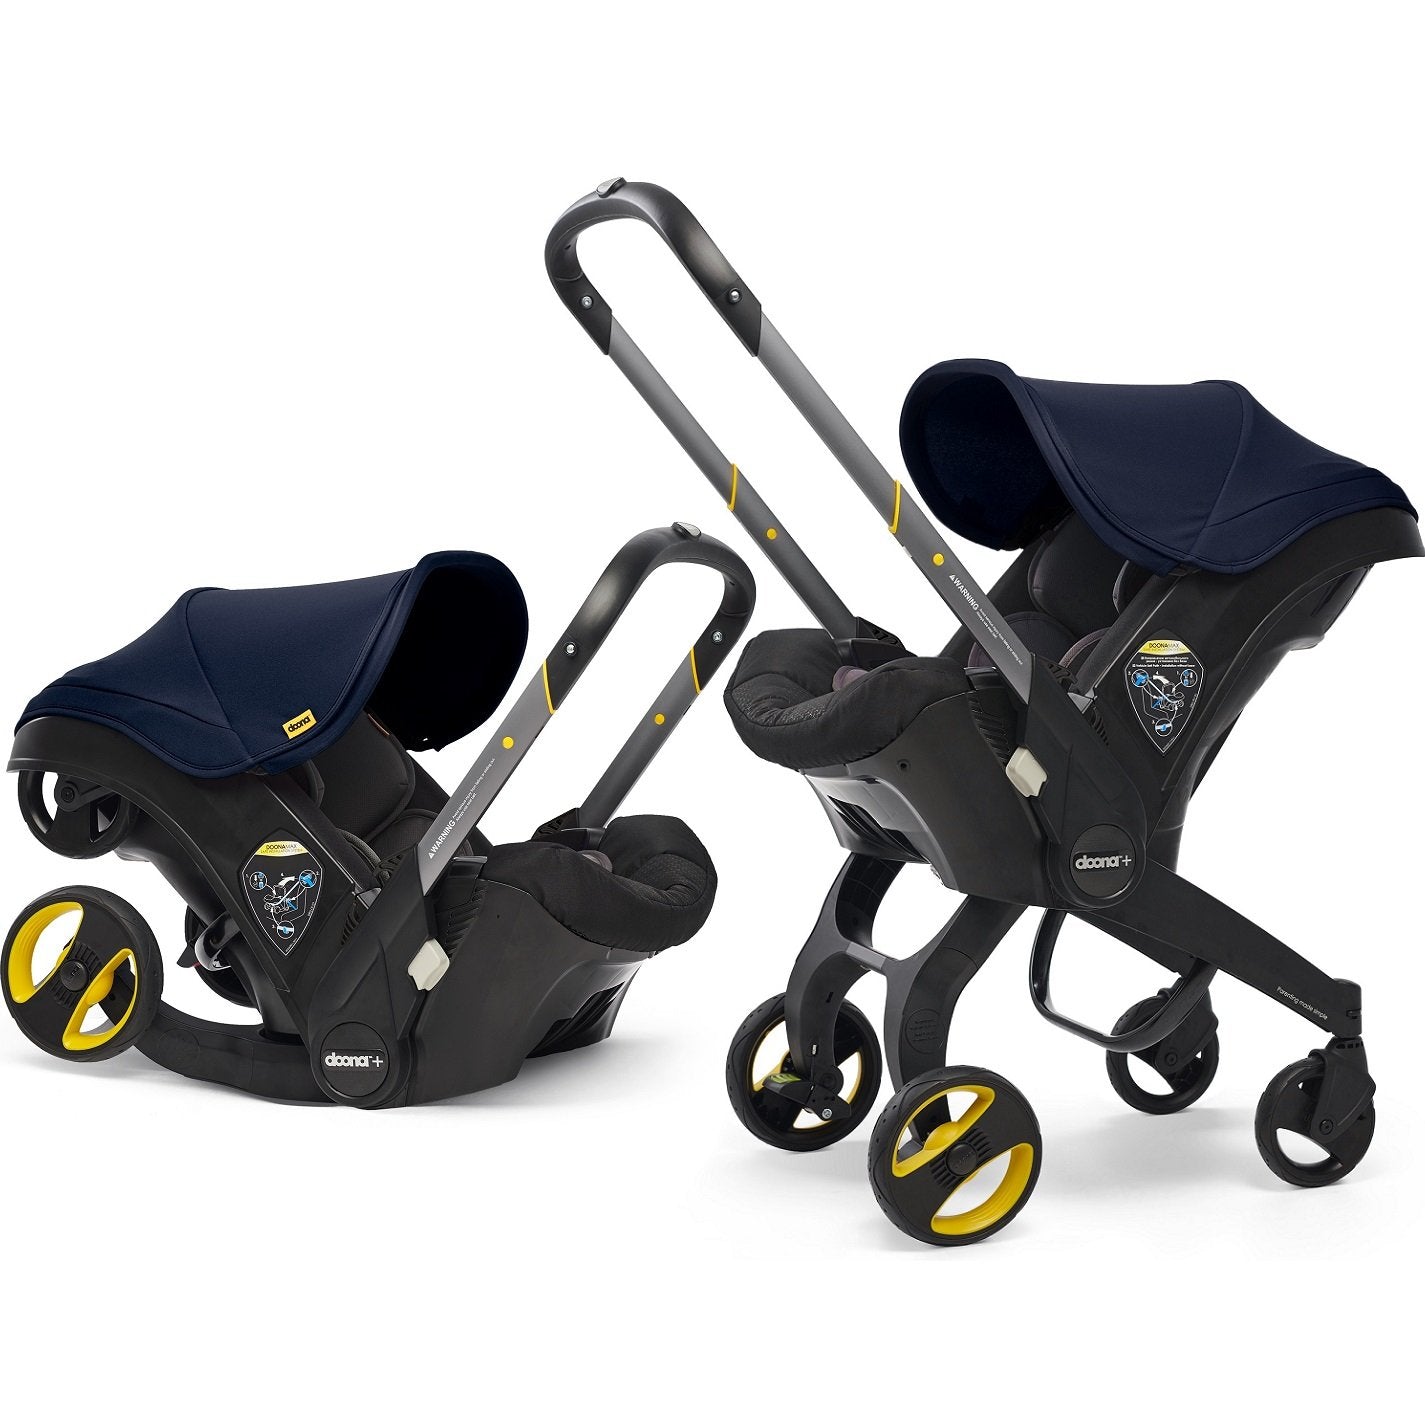 car seat and stroller in 1